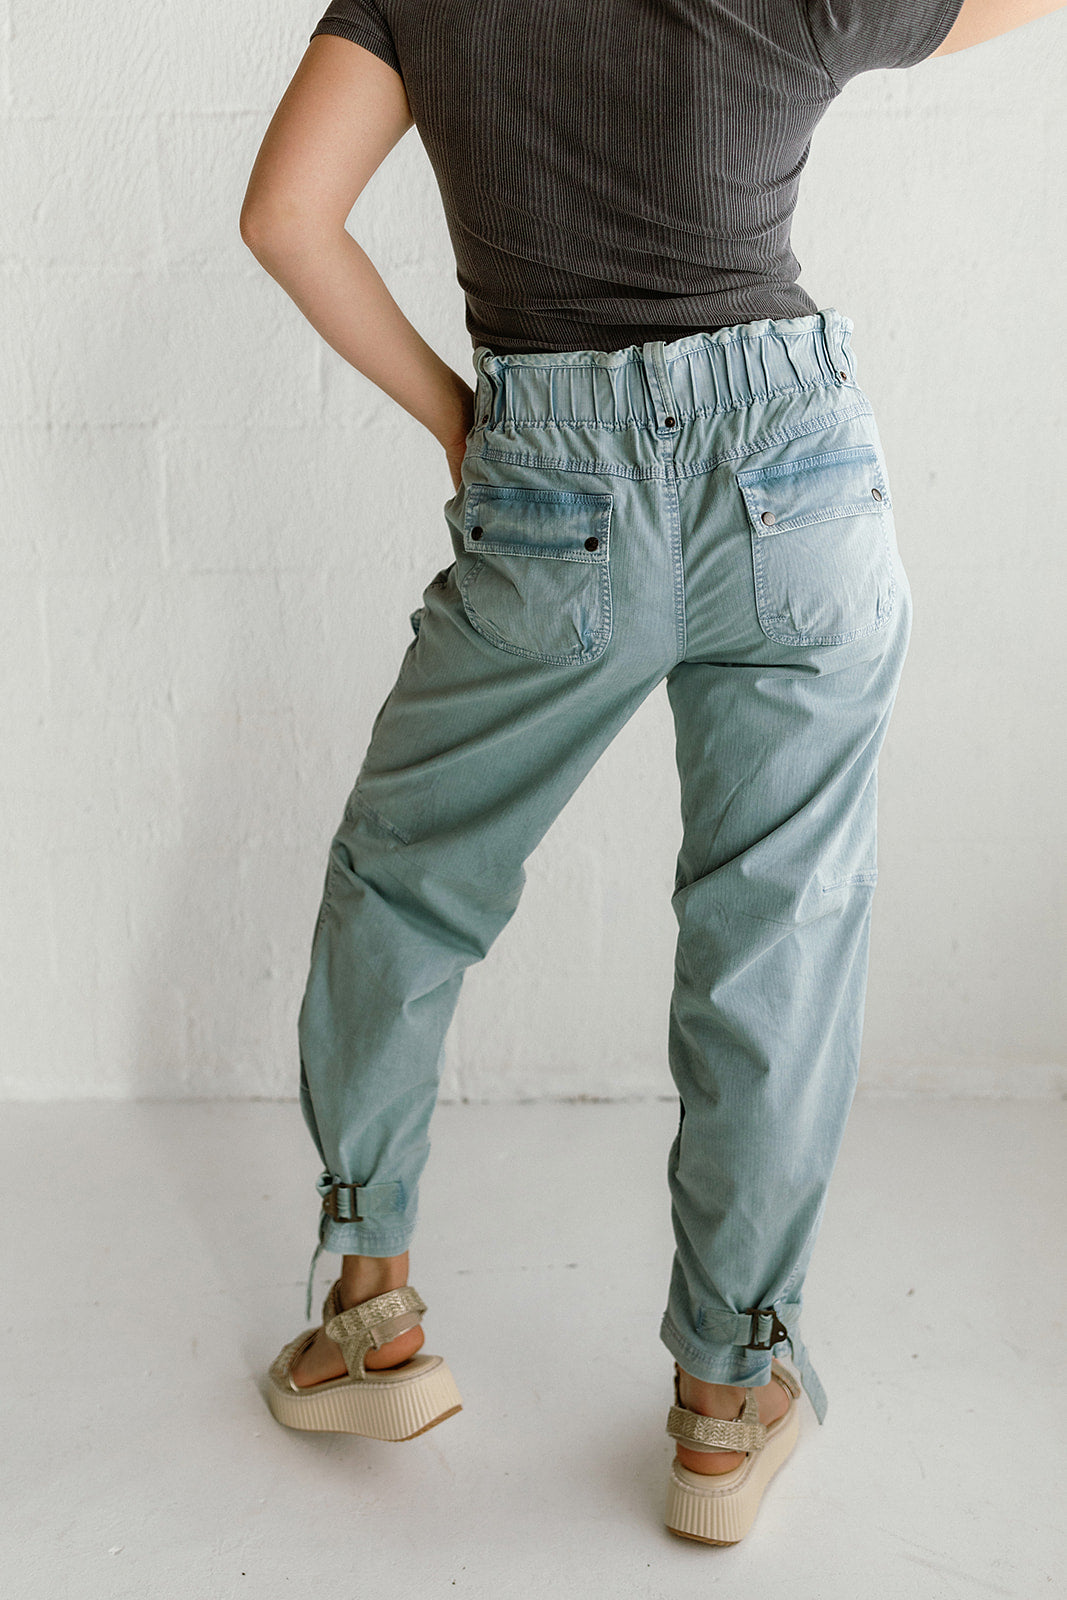 Free People- Can't Compare Slouch Pants